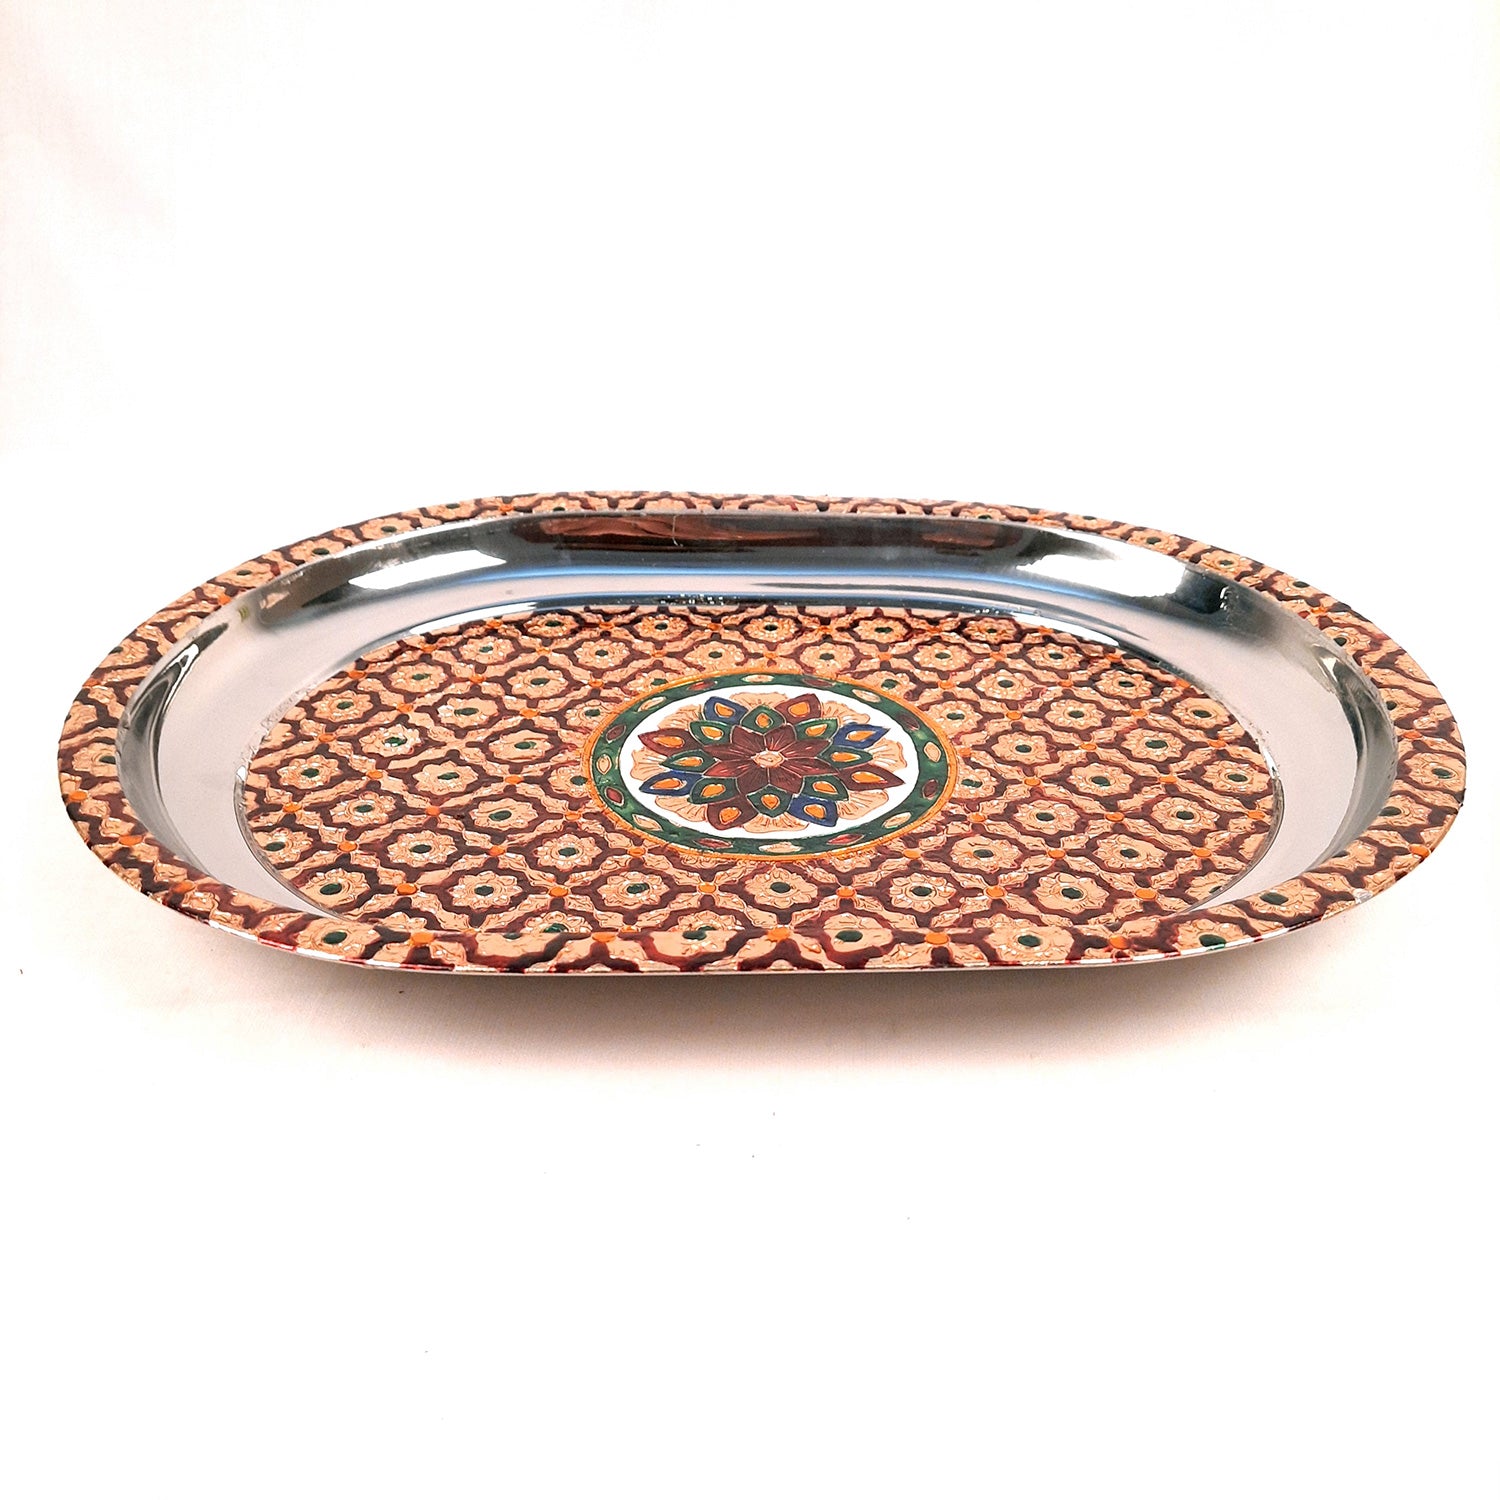 Oval Tray - Small Town Home & Decor